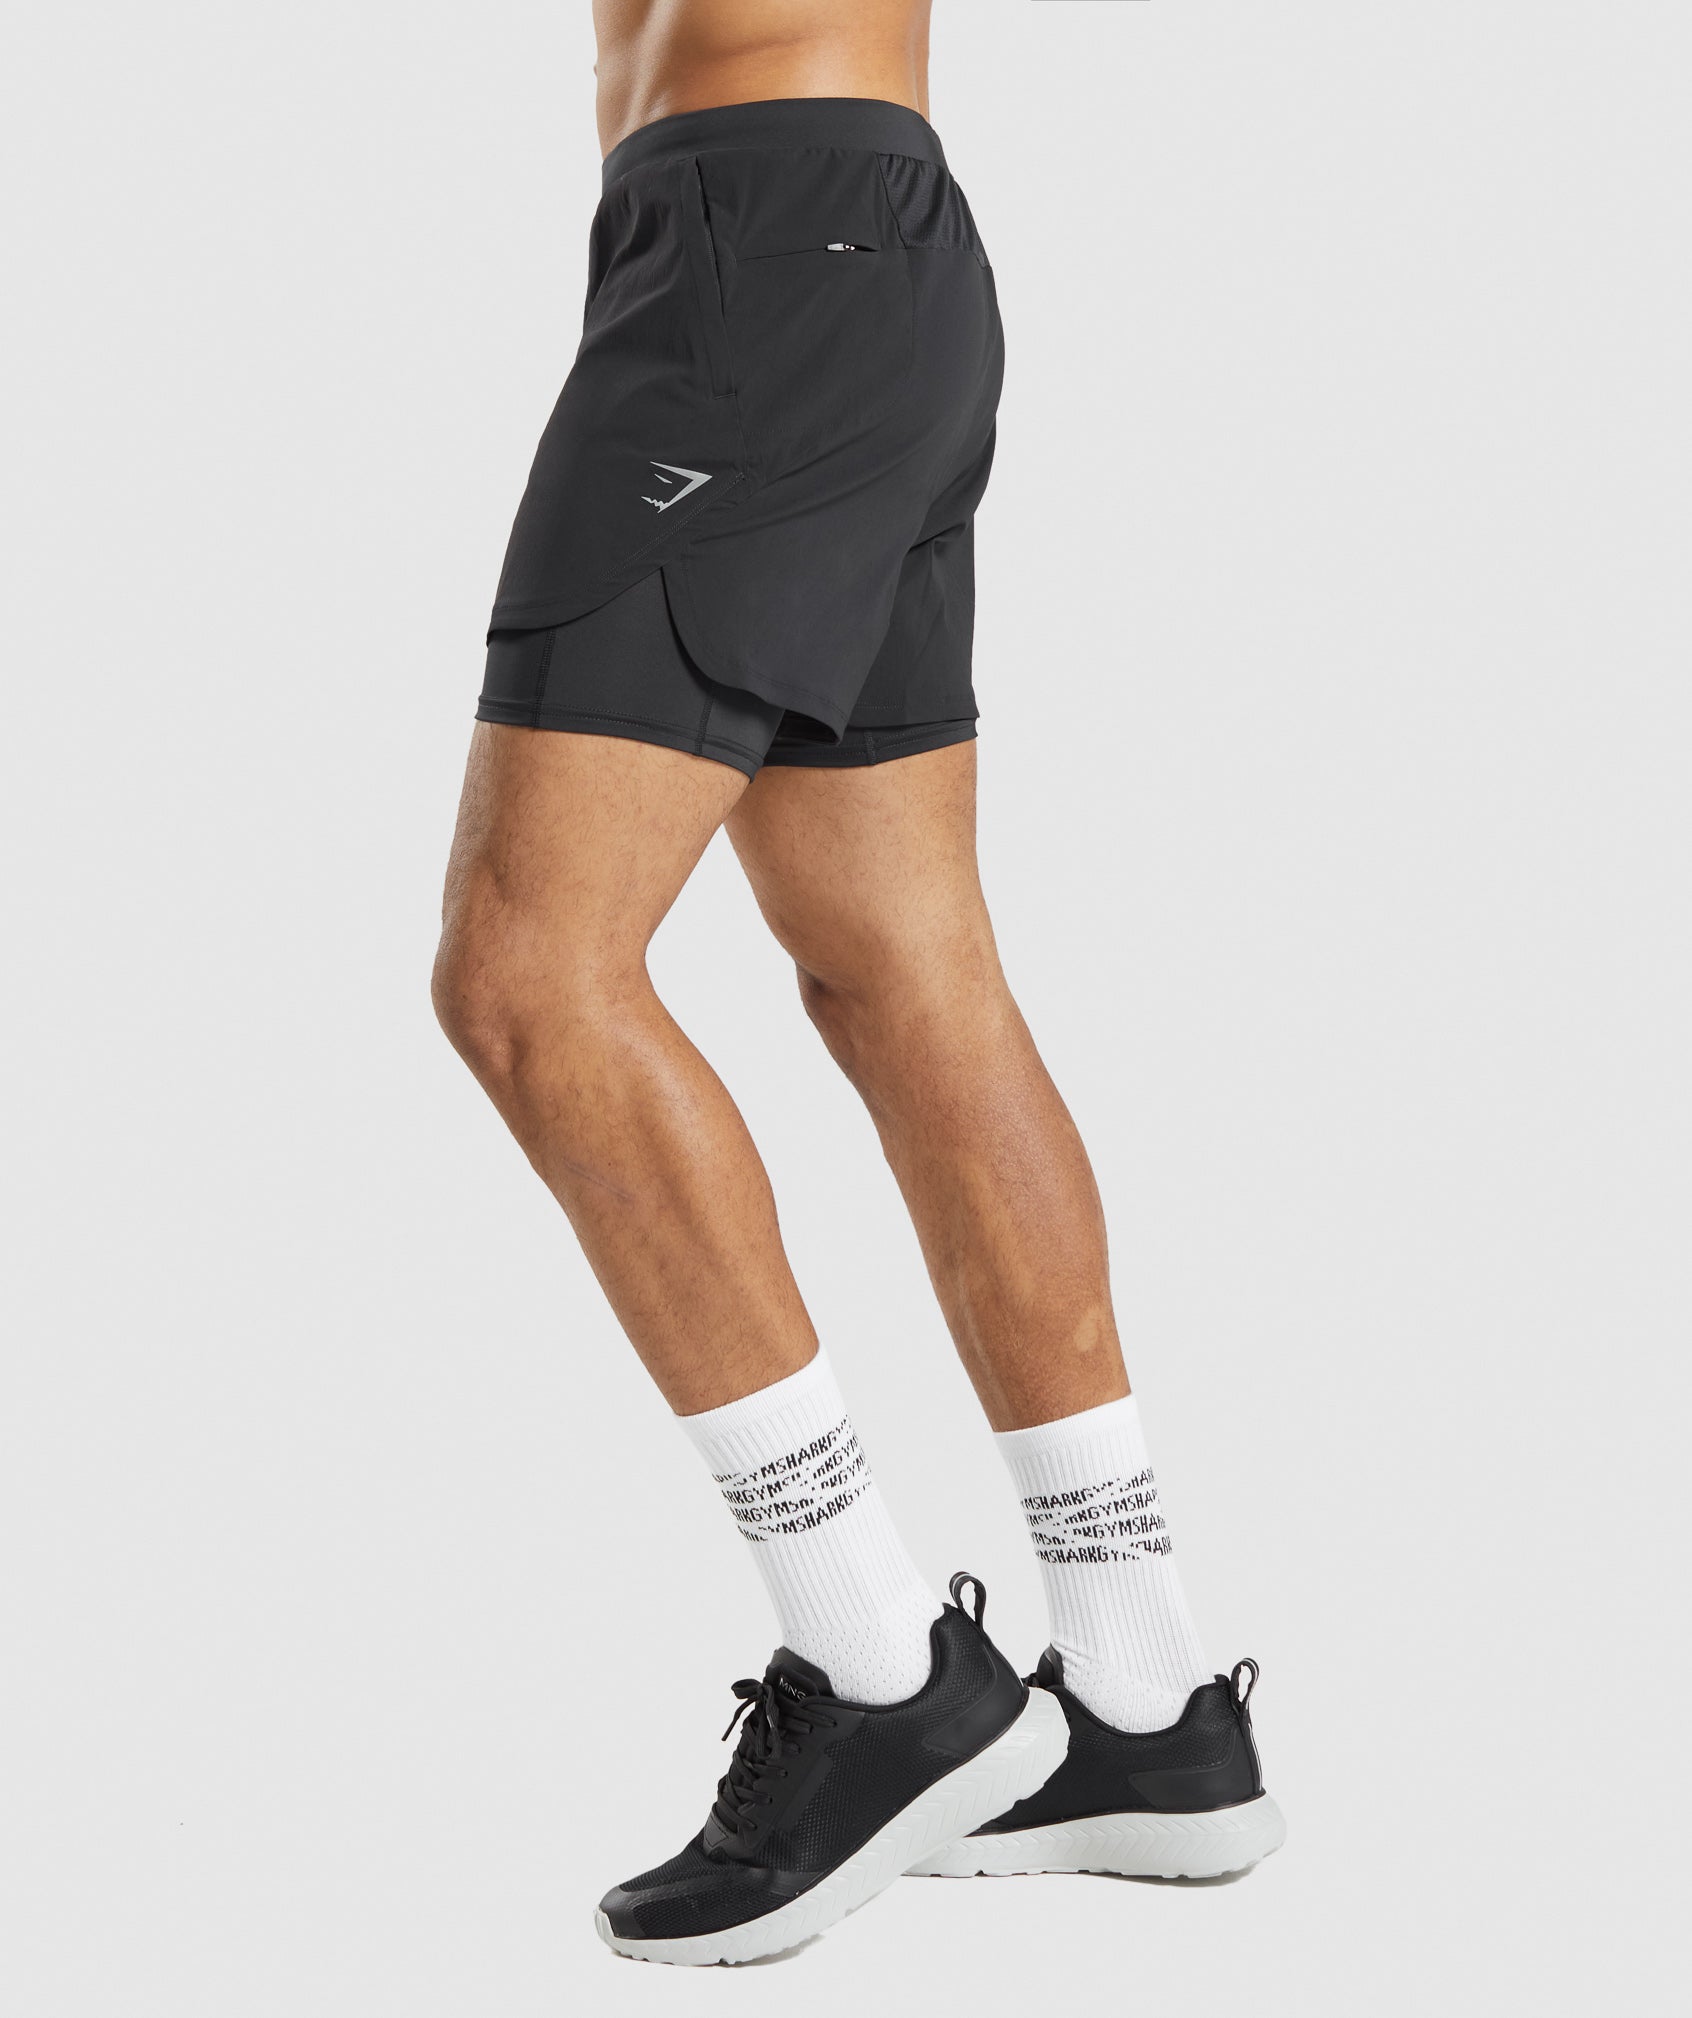 Speed Evolve 5" 2 In 1 Shorts in Black - view 3